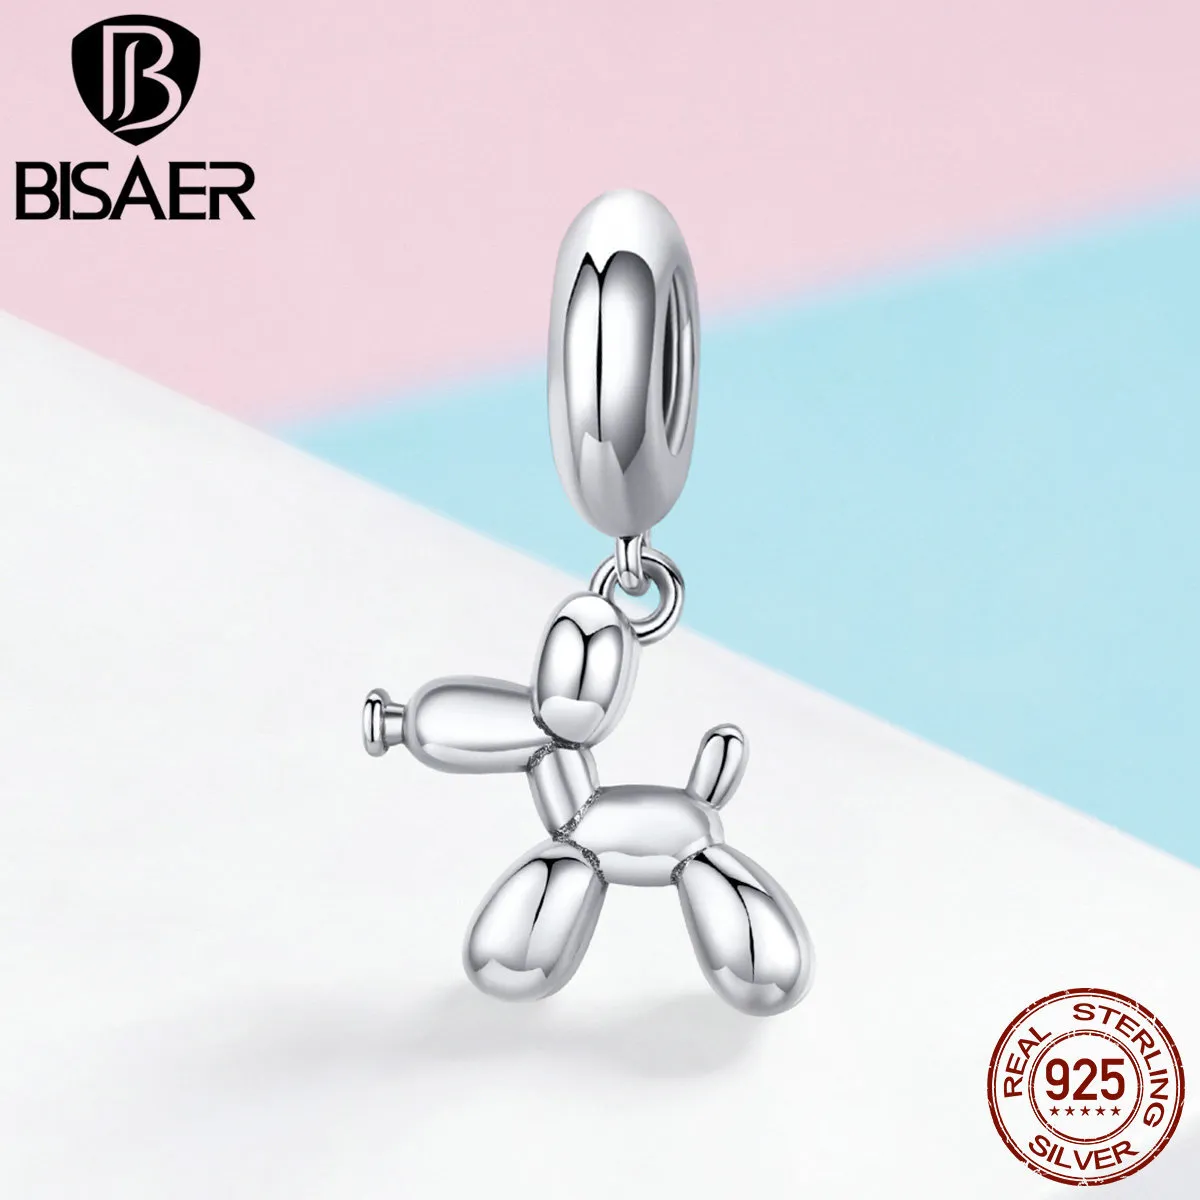 Bisaer 925 Sterling Silver Balloon Dog Tools Charms Puppet Dog Beads Fit Bracet Beads for Silver 925 Jewelry Making ECC981 Q0225323H